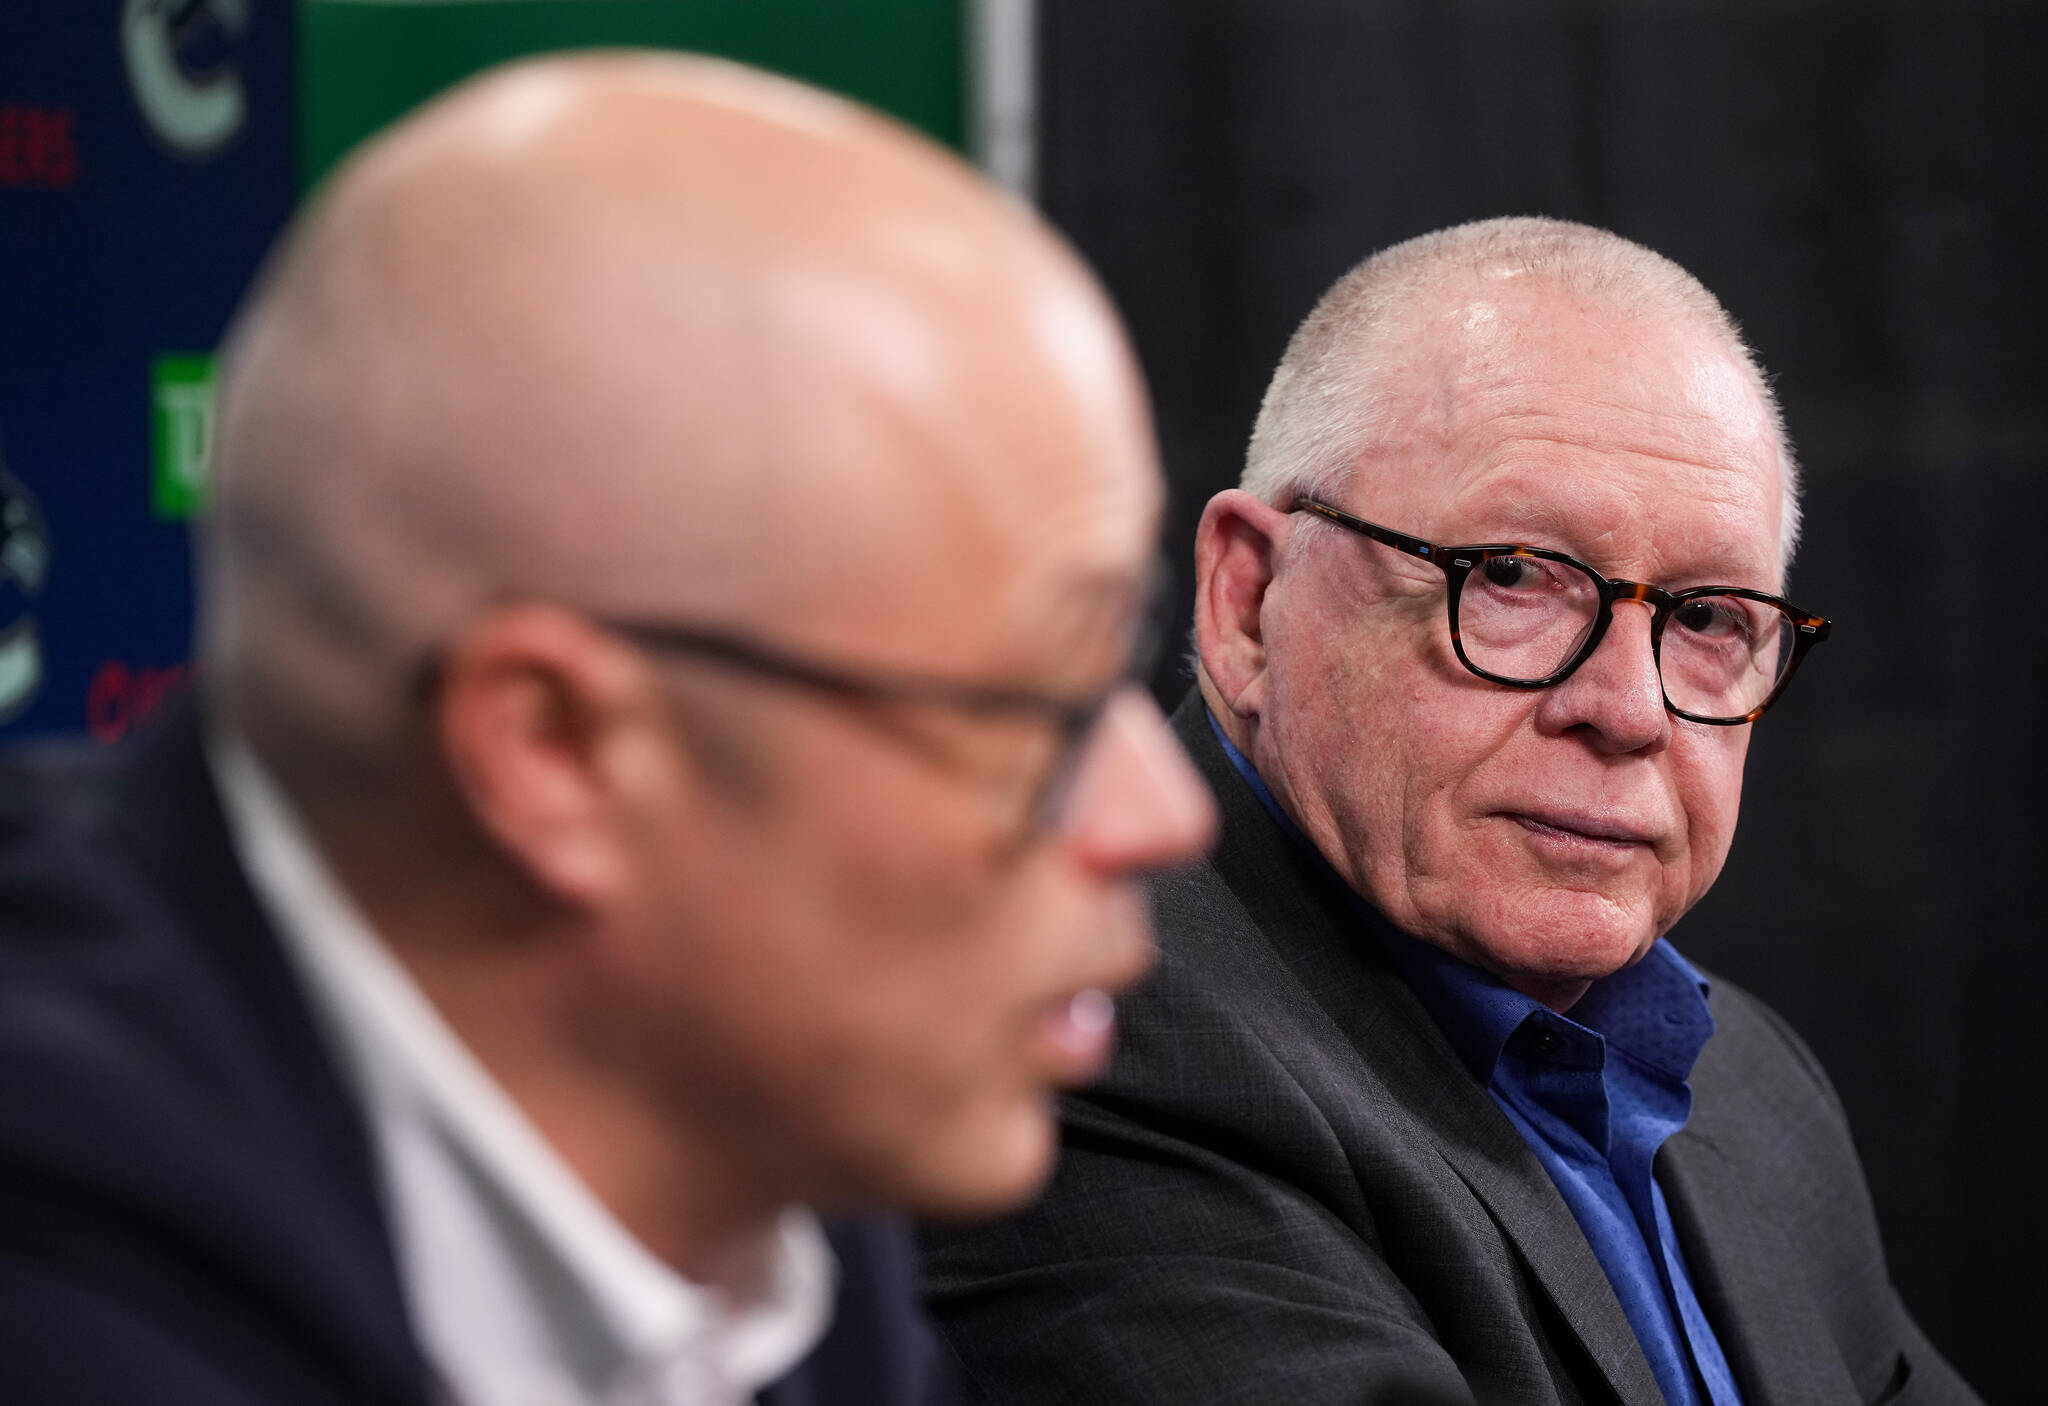 Vancouver Canucks president of hockey operations Jim Rutherford, back right, listens as general manager Patrik Allvin responds to a question during an end of NHL hockey season news conference, in Vancouver, on Tuesday, May 3, 2022. THE CANADIAN PRESS/Darryl Dyck